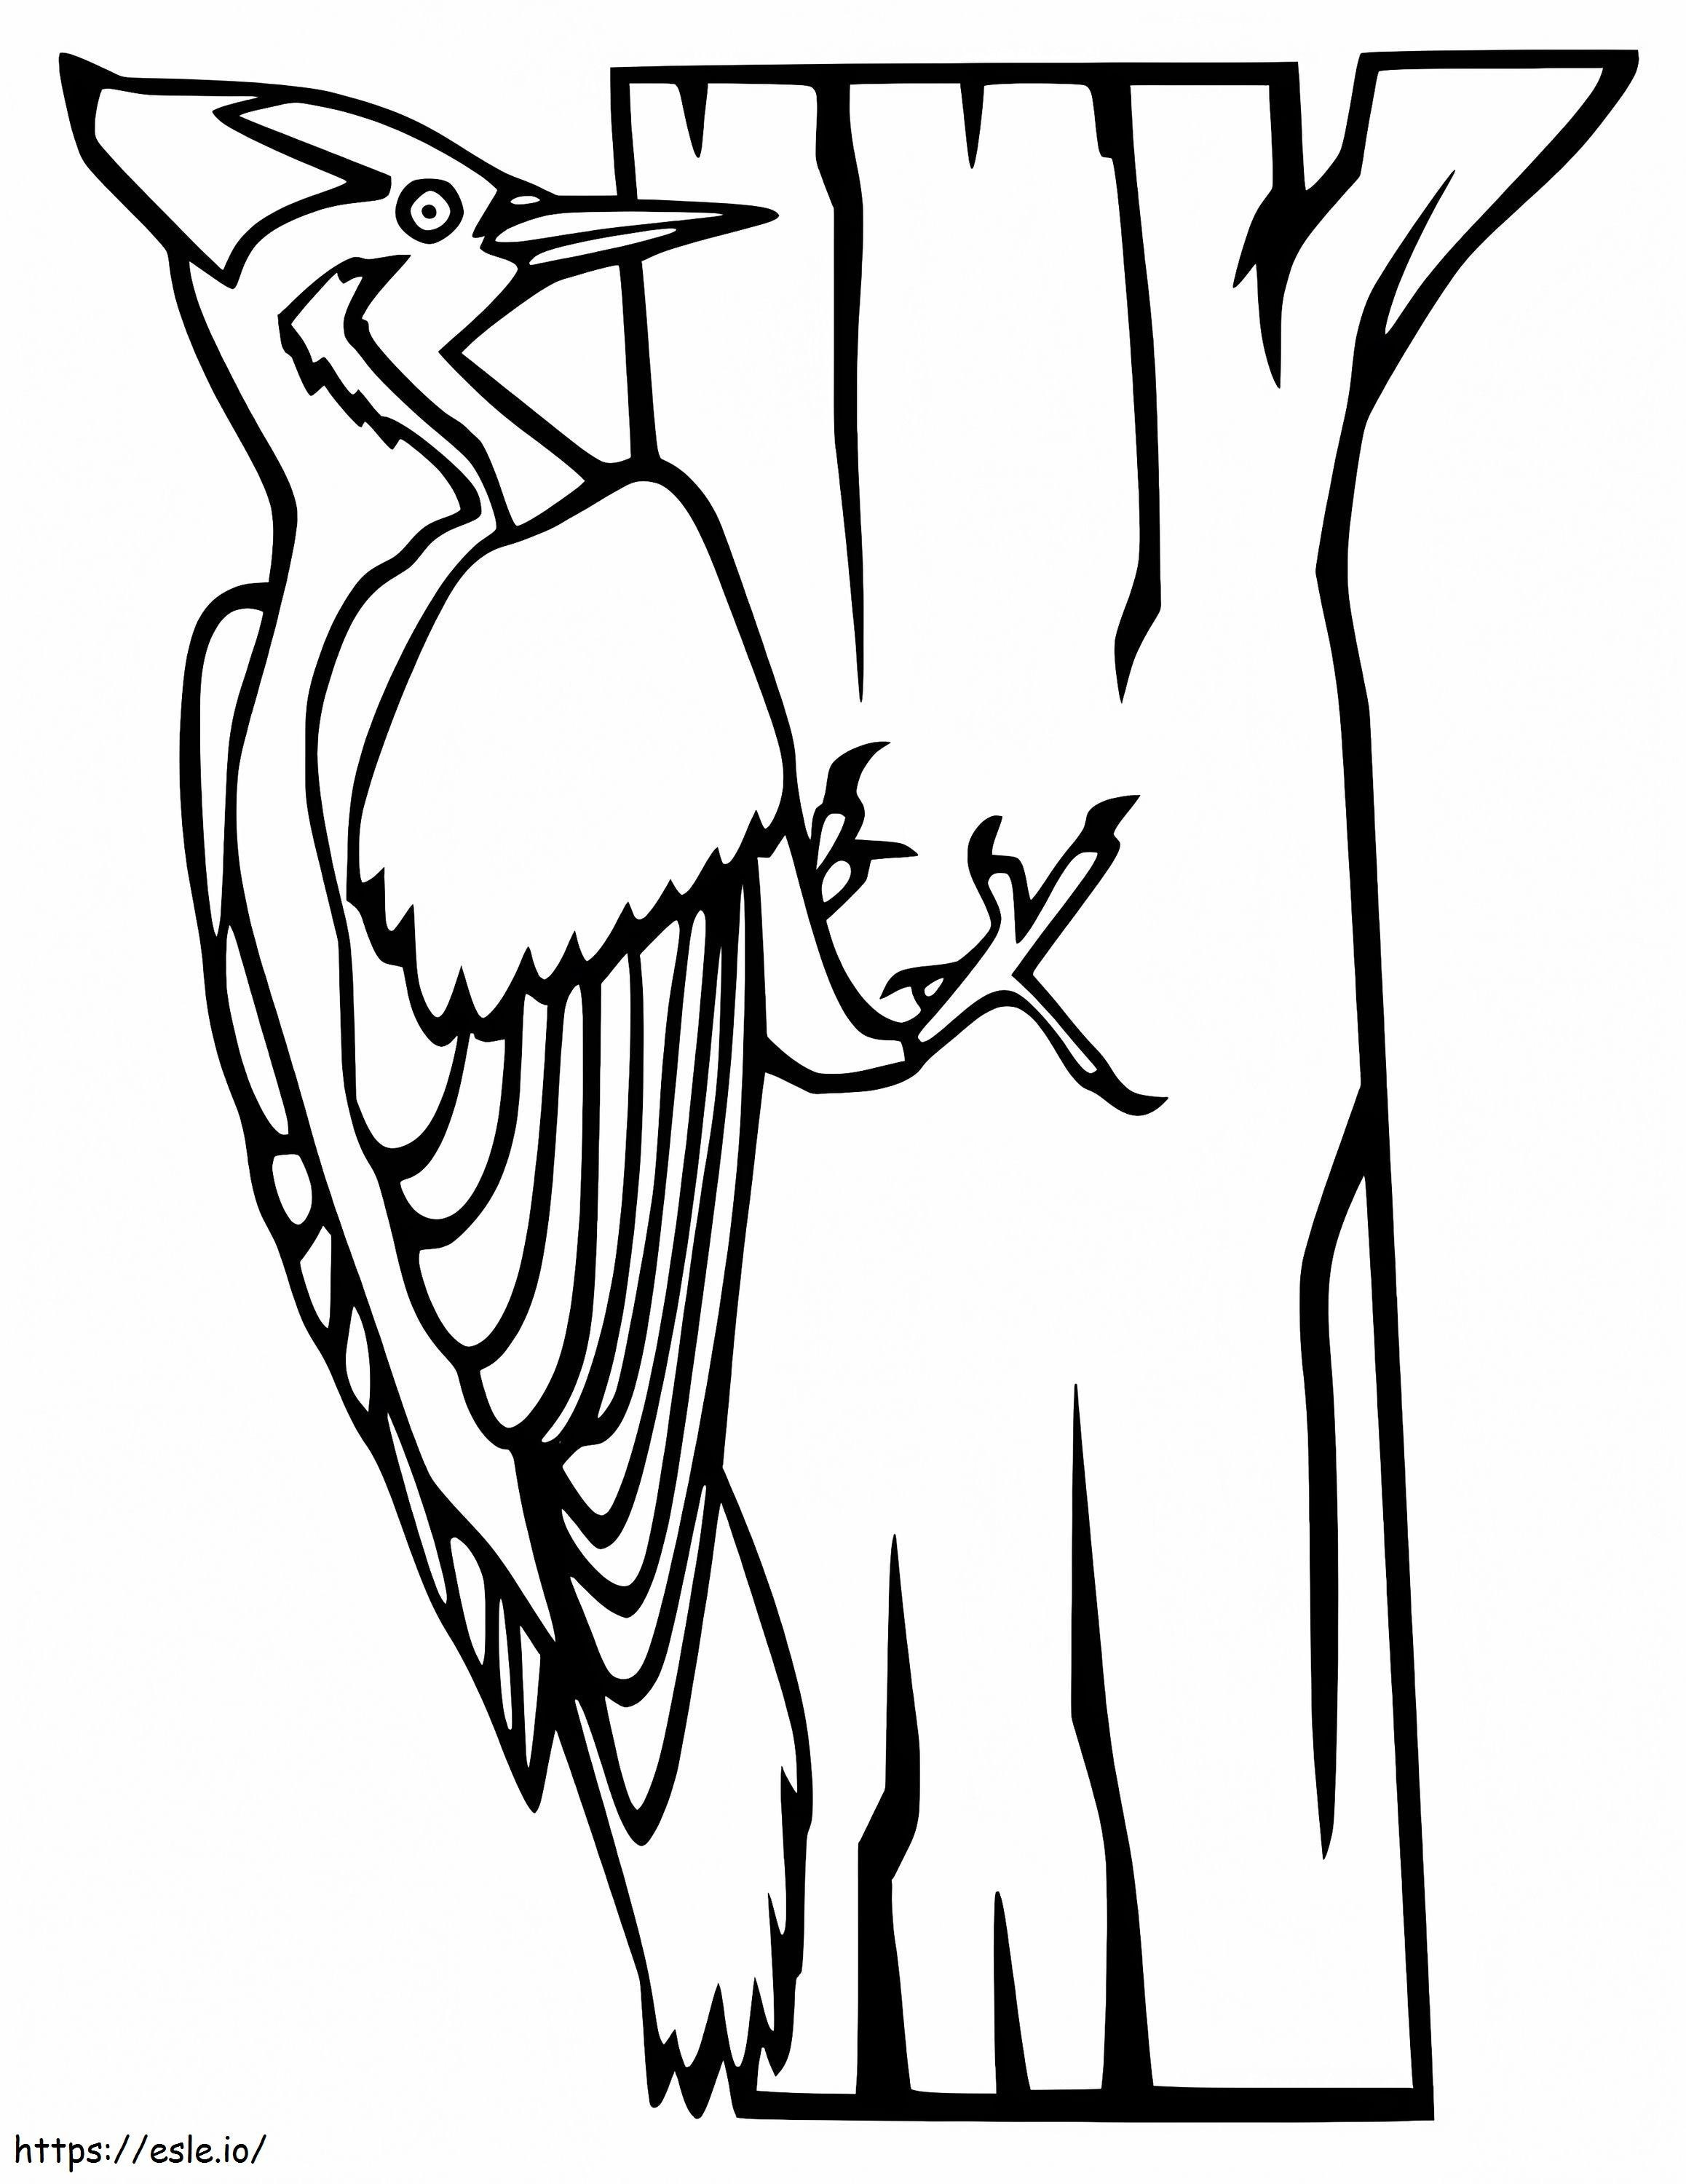 Woodpecker 4 coloring page